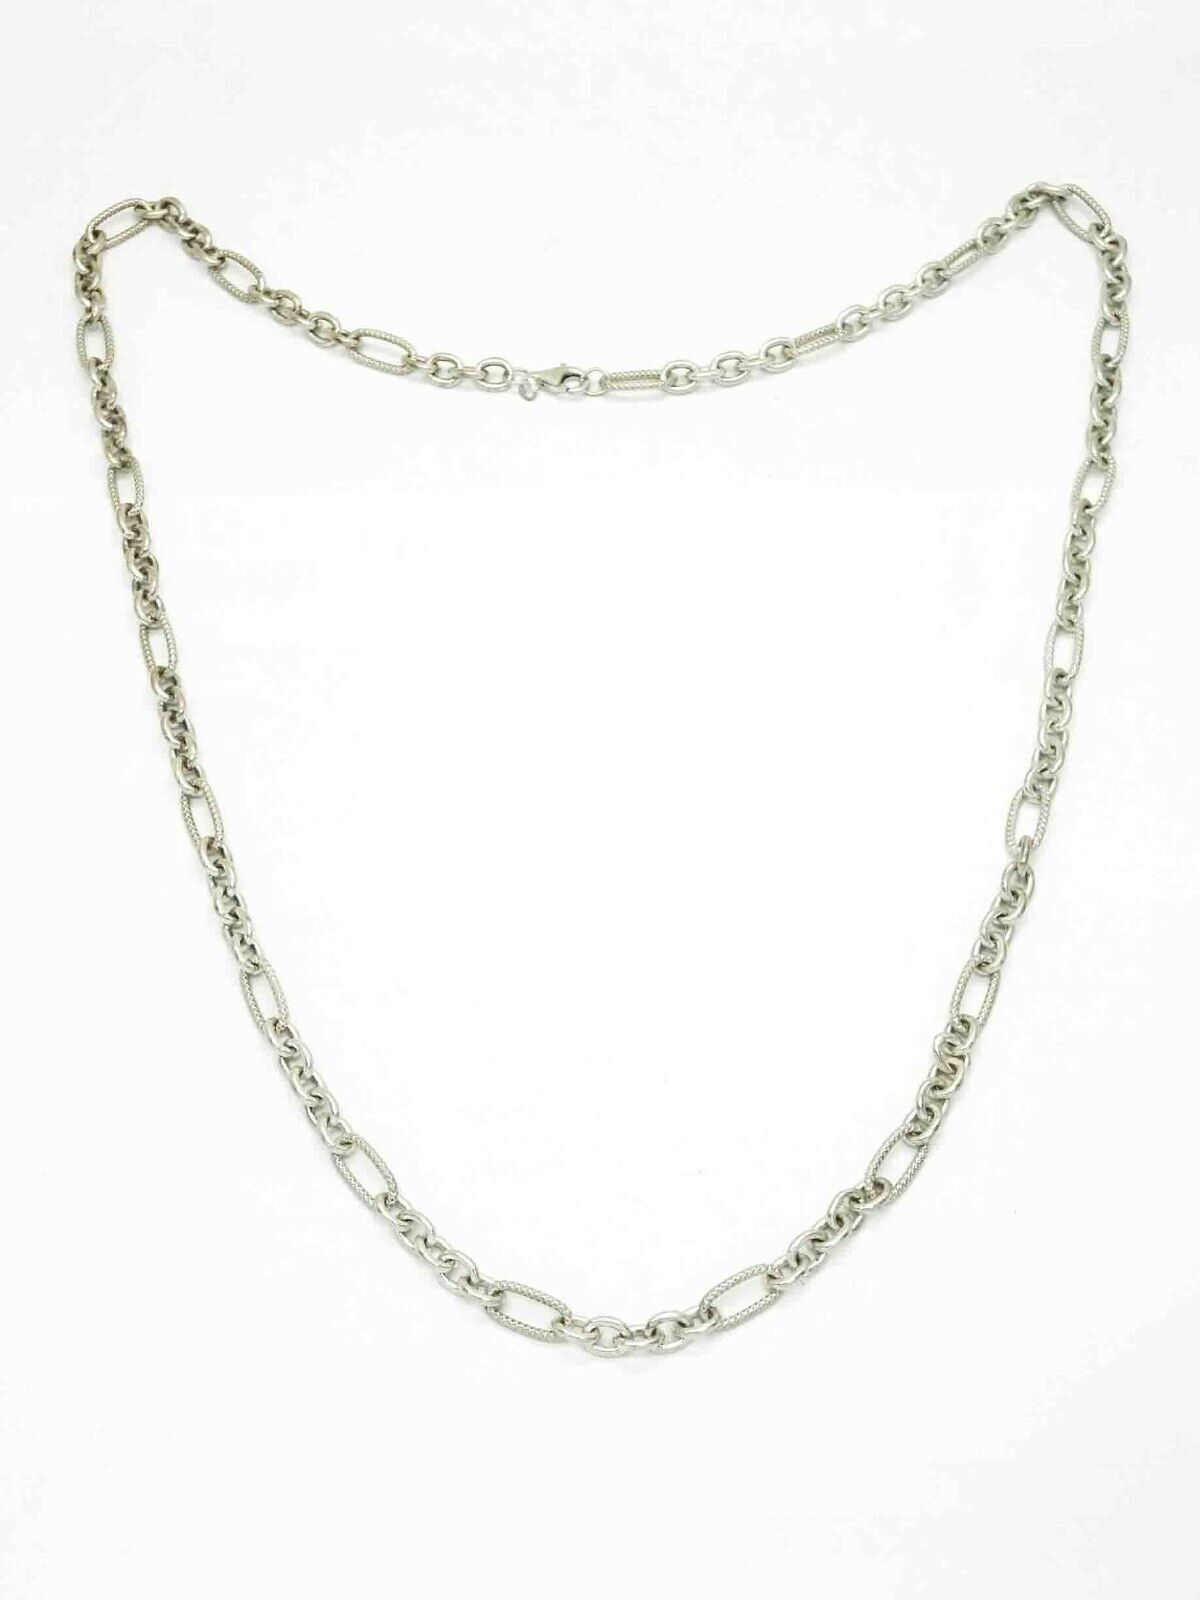 7mm Wide Figaro-Style Link Chain Necklace Sterling Silver 32" Long 65.2 Grams